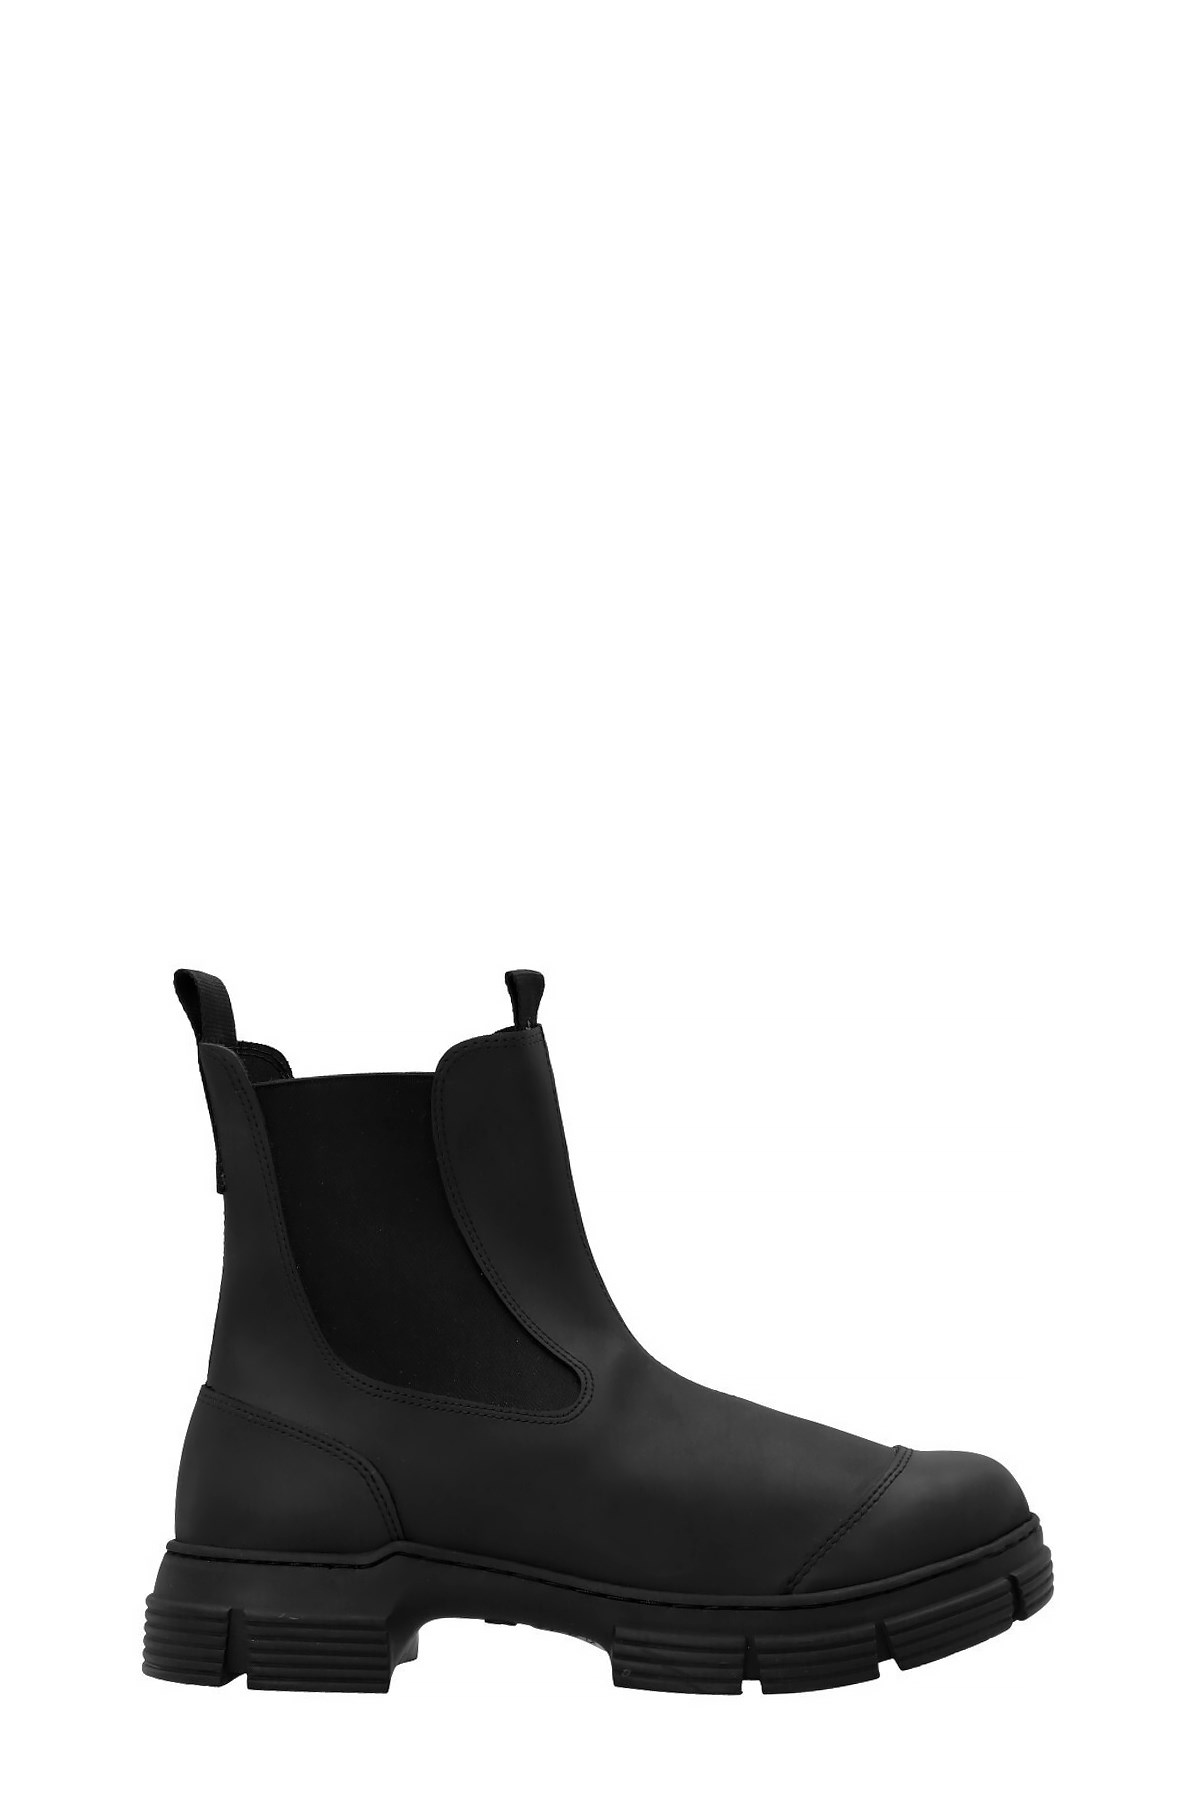 GANNI Recycled Rubber Ankle Boots